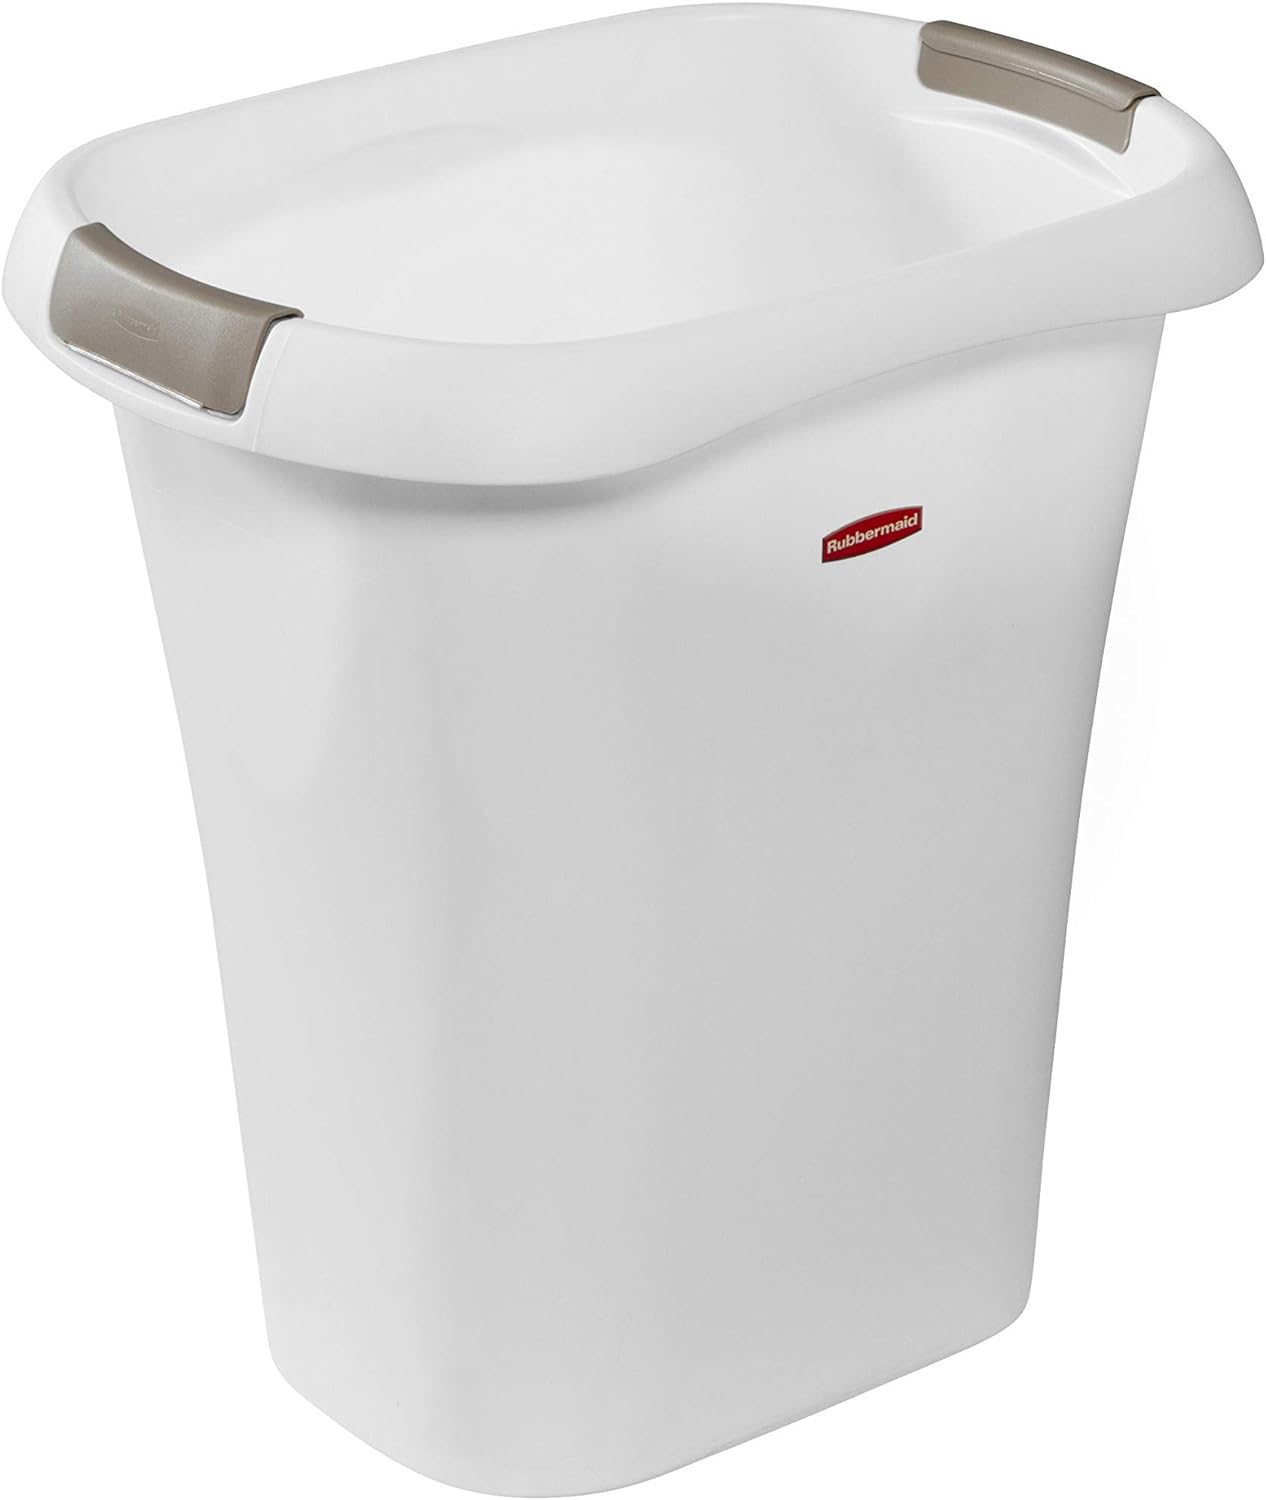 Rubbermaid Undercounter Small Trash Can Review